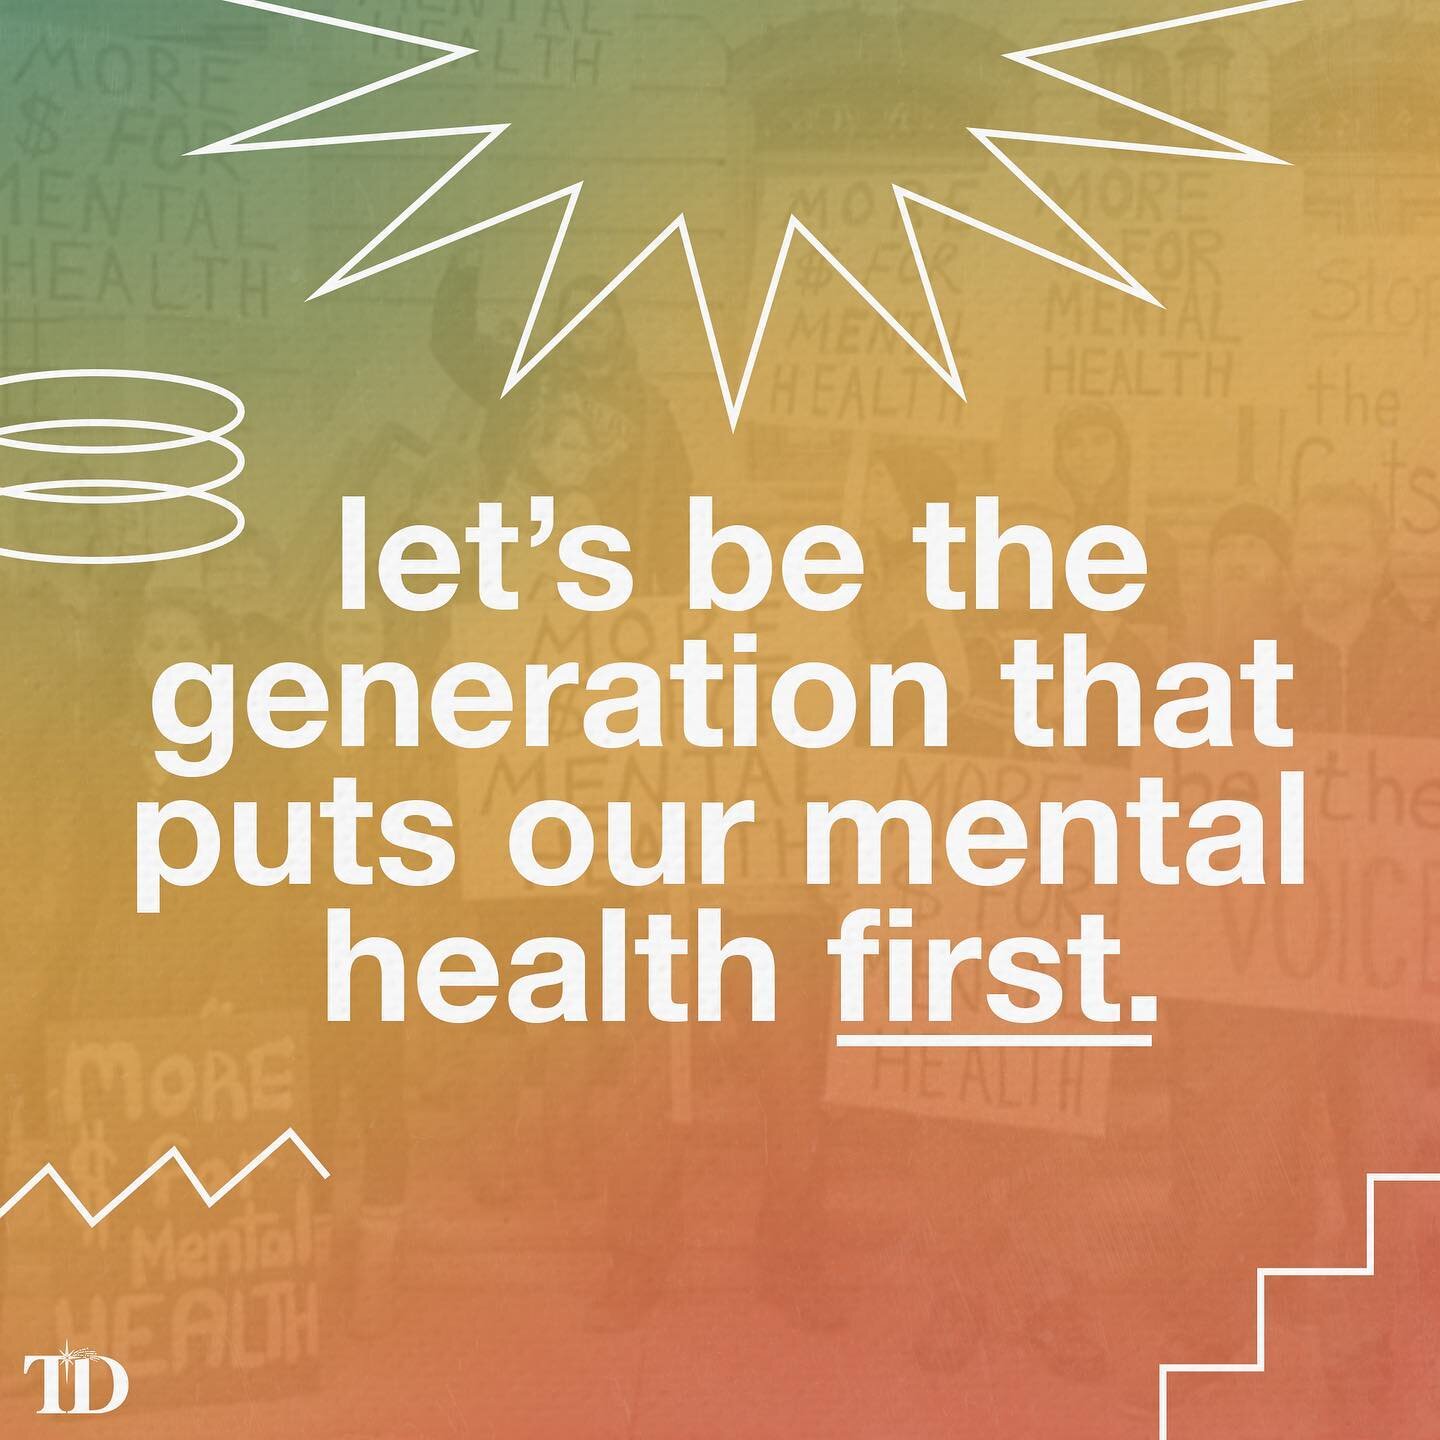 The time is now.

When we stop the stigma, give importance to each aspect of our being, work towards having equal access, and put our mental health first. ✊🤍

We hope that, with our October initiative, you now feel more empowered to take on the worl